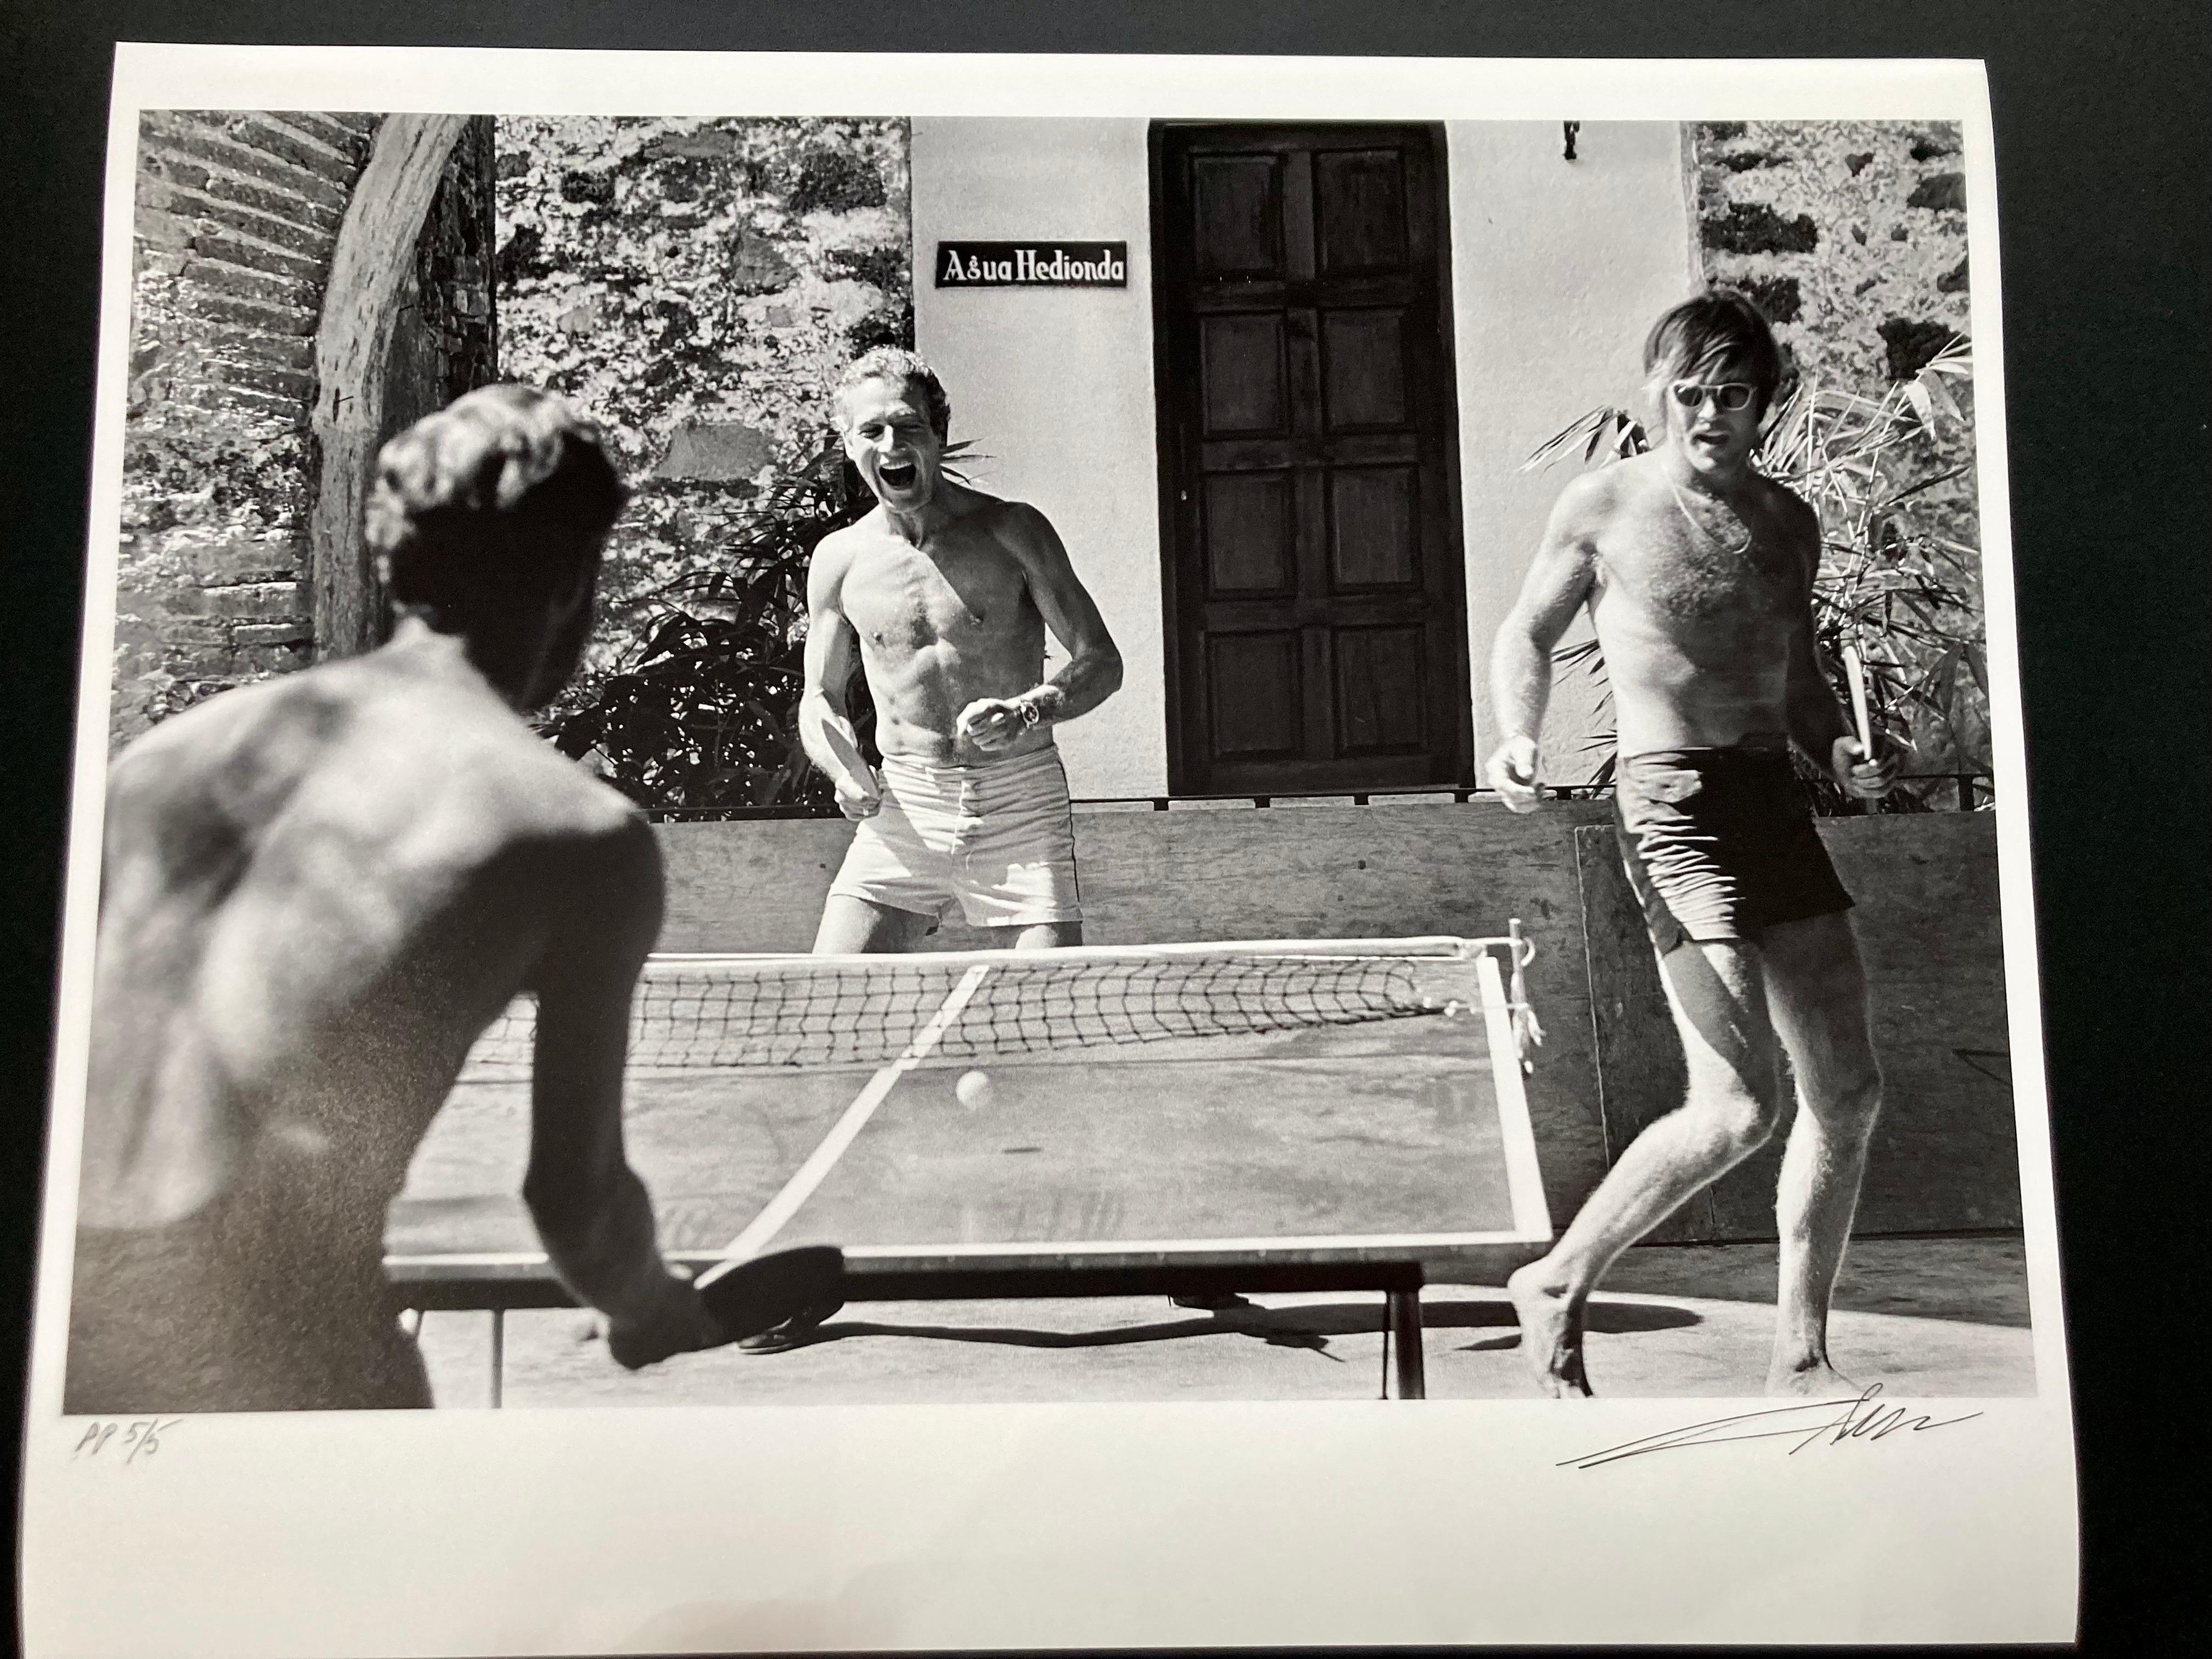 Robert Redford and Paul Newman playing Ping-Pong, printers proof print - Photograph by Lawrence Schiller